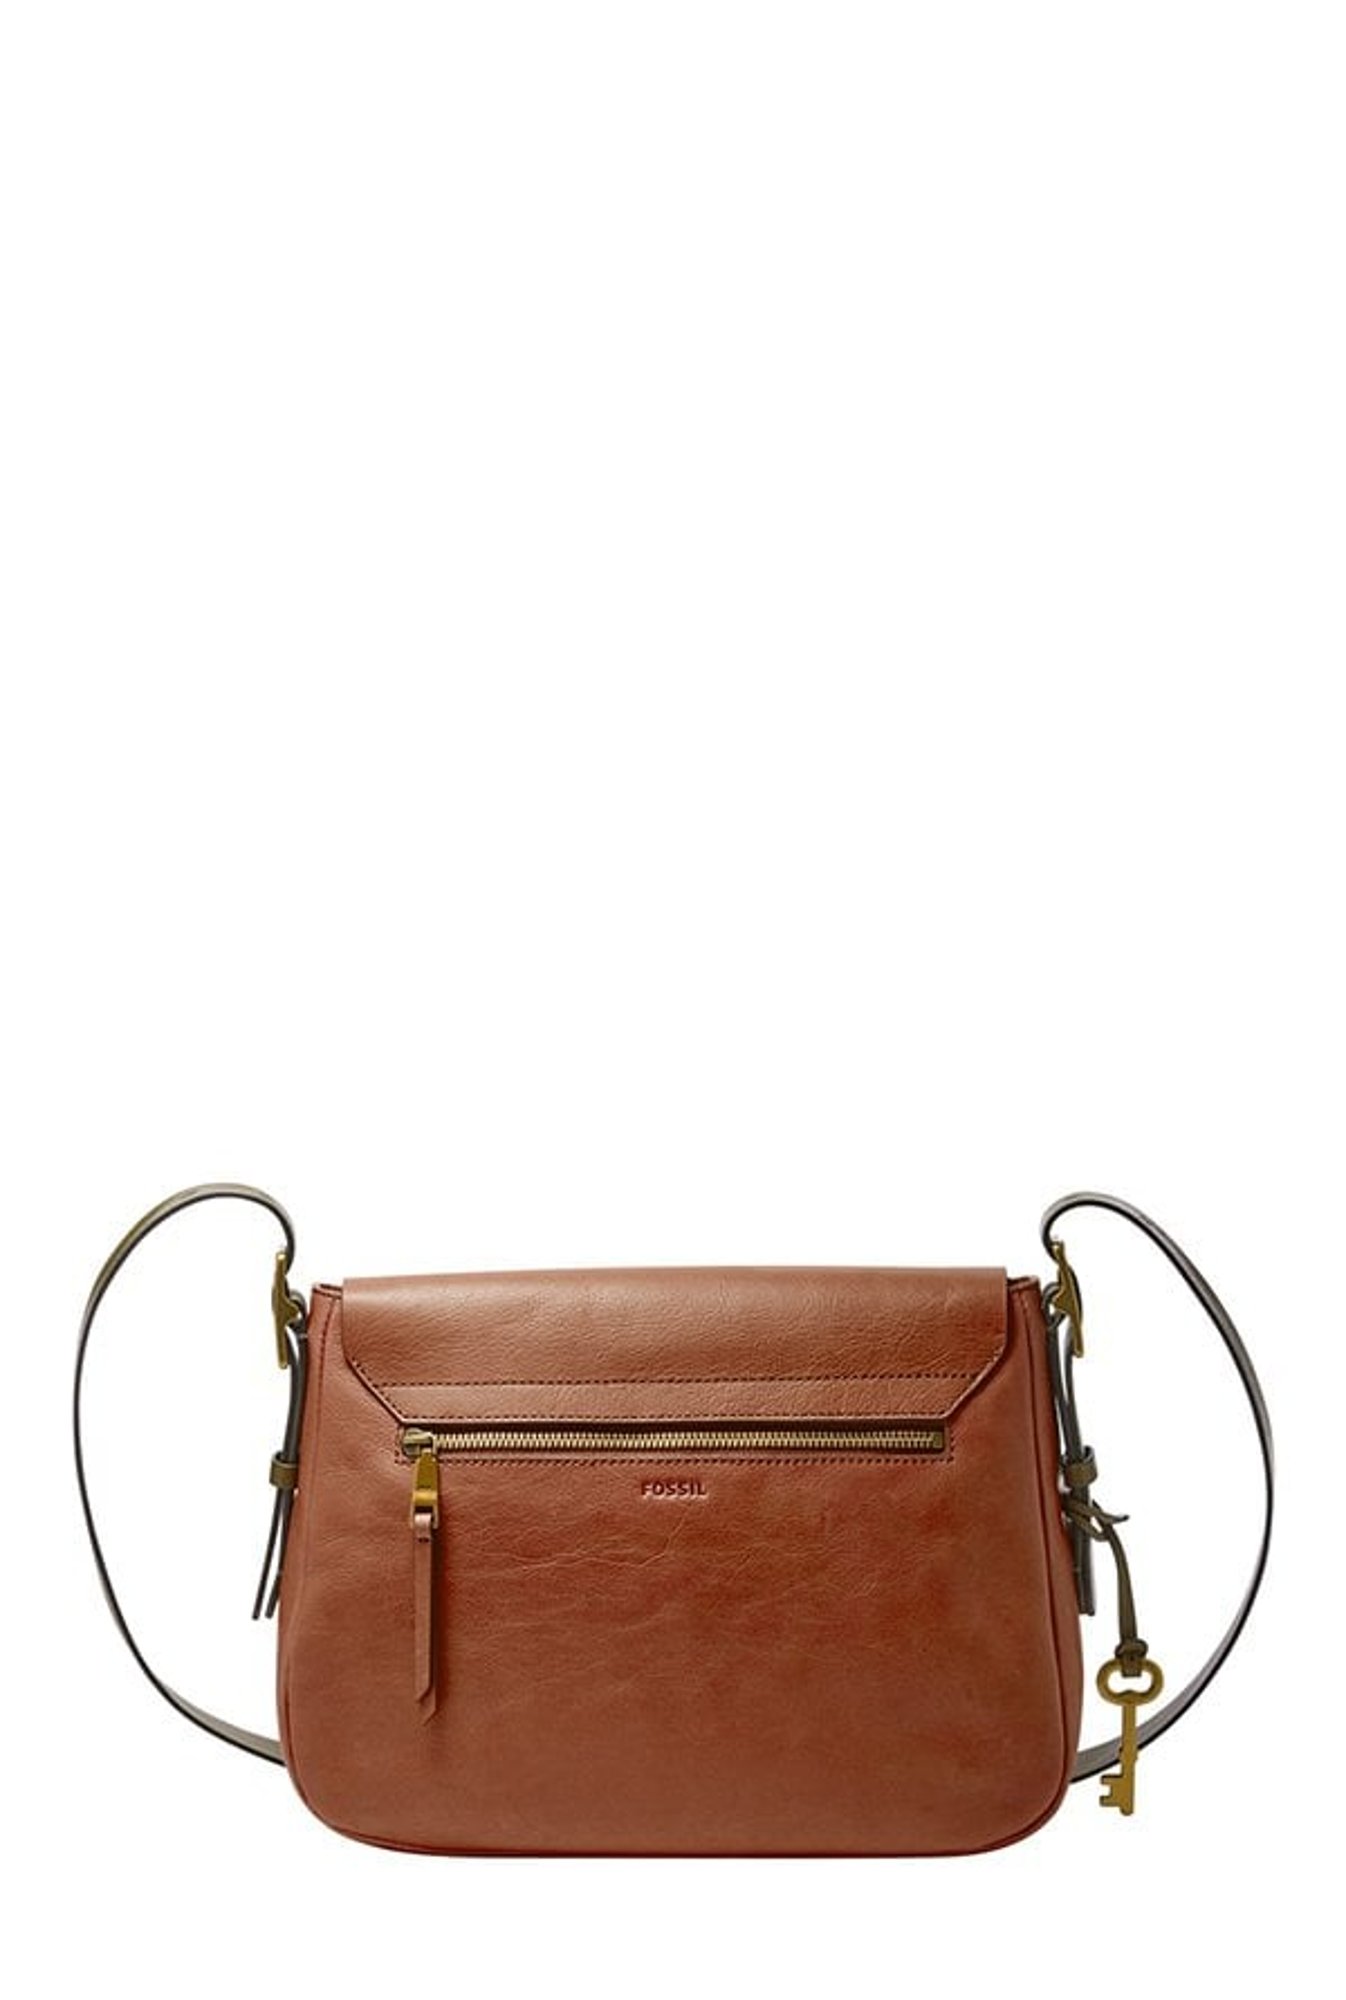 Fossil Small Zoey Leather Crossbody Bag - Macy's